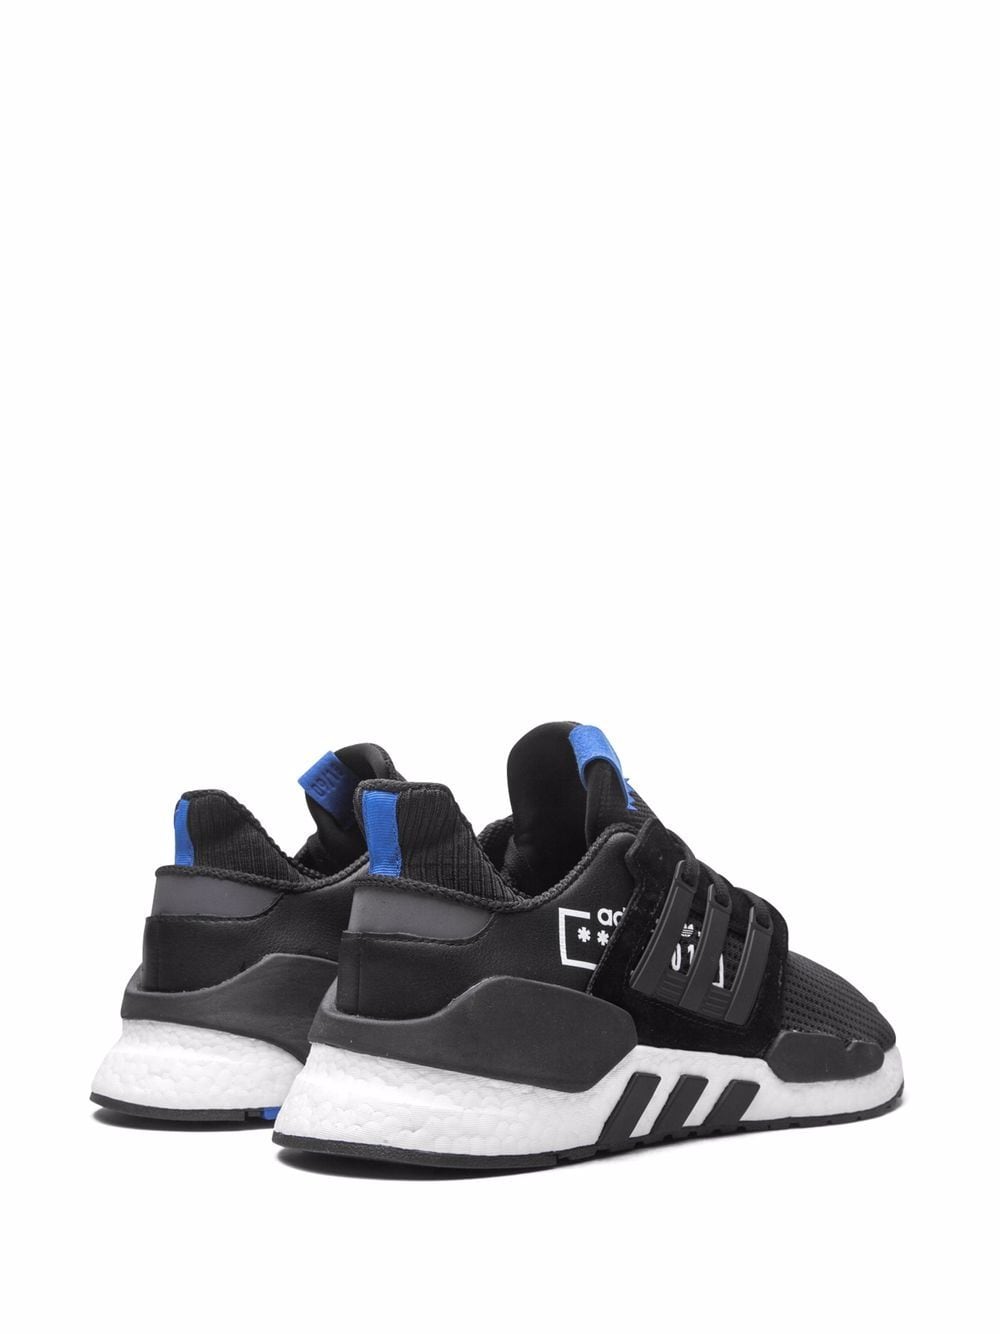 adidas EQT Support 91 18 sneakers "Alphatype" Black